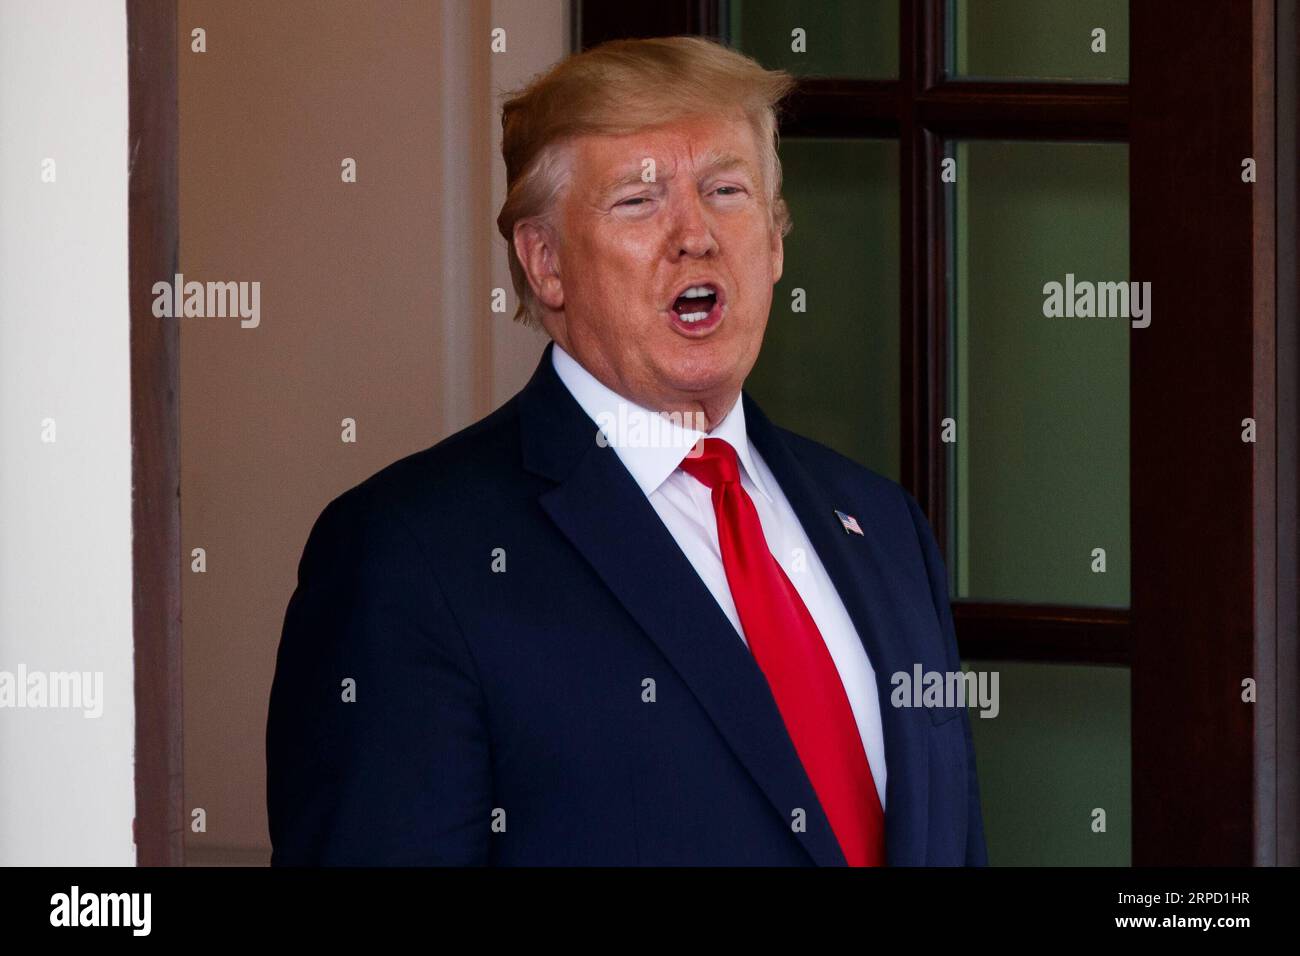 (190718) -- WASHINGTON, July 18, 2019 (Xinhua) -- U.S. President Donald Trump speaks to the media at the White House in Washington D.C., the United States, on July 18, 2019. Donald Trump announced on Thursday that a U.S. warship destroyed an Iranian drone in the Strait of Hormuz. Speaking at the White House, Trump said that USS Boxer, an amphibious assault ship of the U.S. Navy, destroyed the drone that threatened the U.S. warship by flying within 1,000 yards of it. (Xinhua/Ting Shen) U.S.-WASHINGTON D.C.-TRUMP-IRAN-DRONE PUBLICATIONxNOTxINxCHN Stock Photo